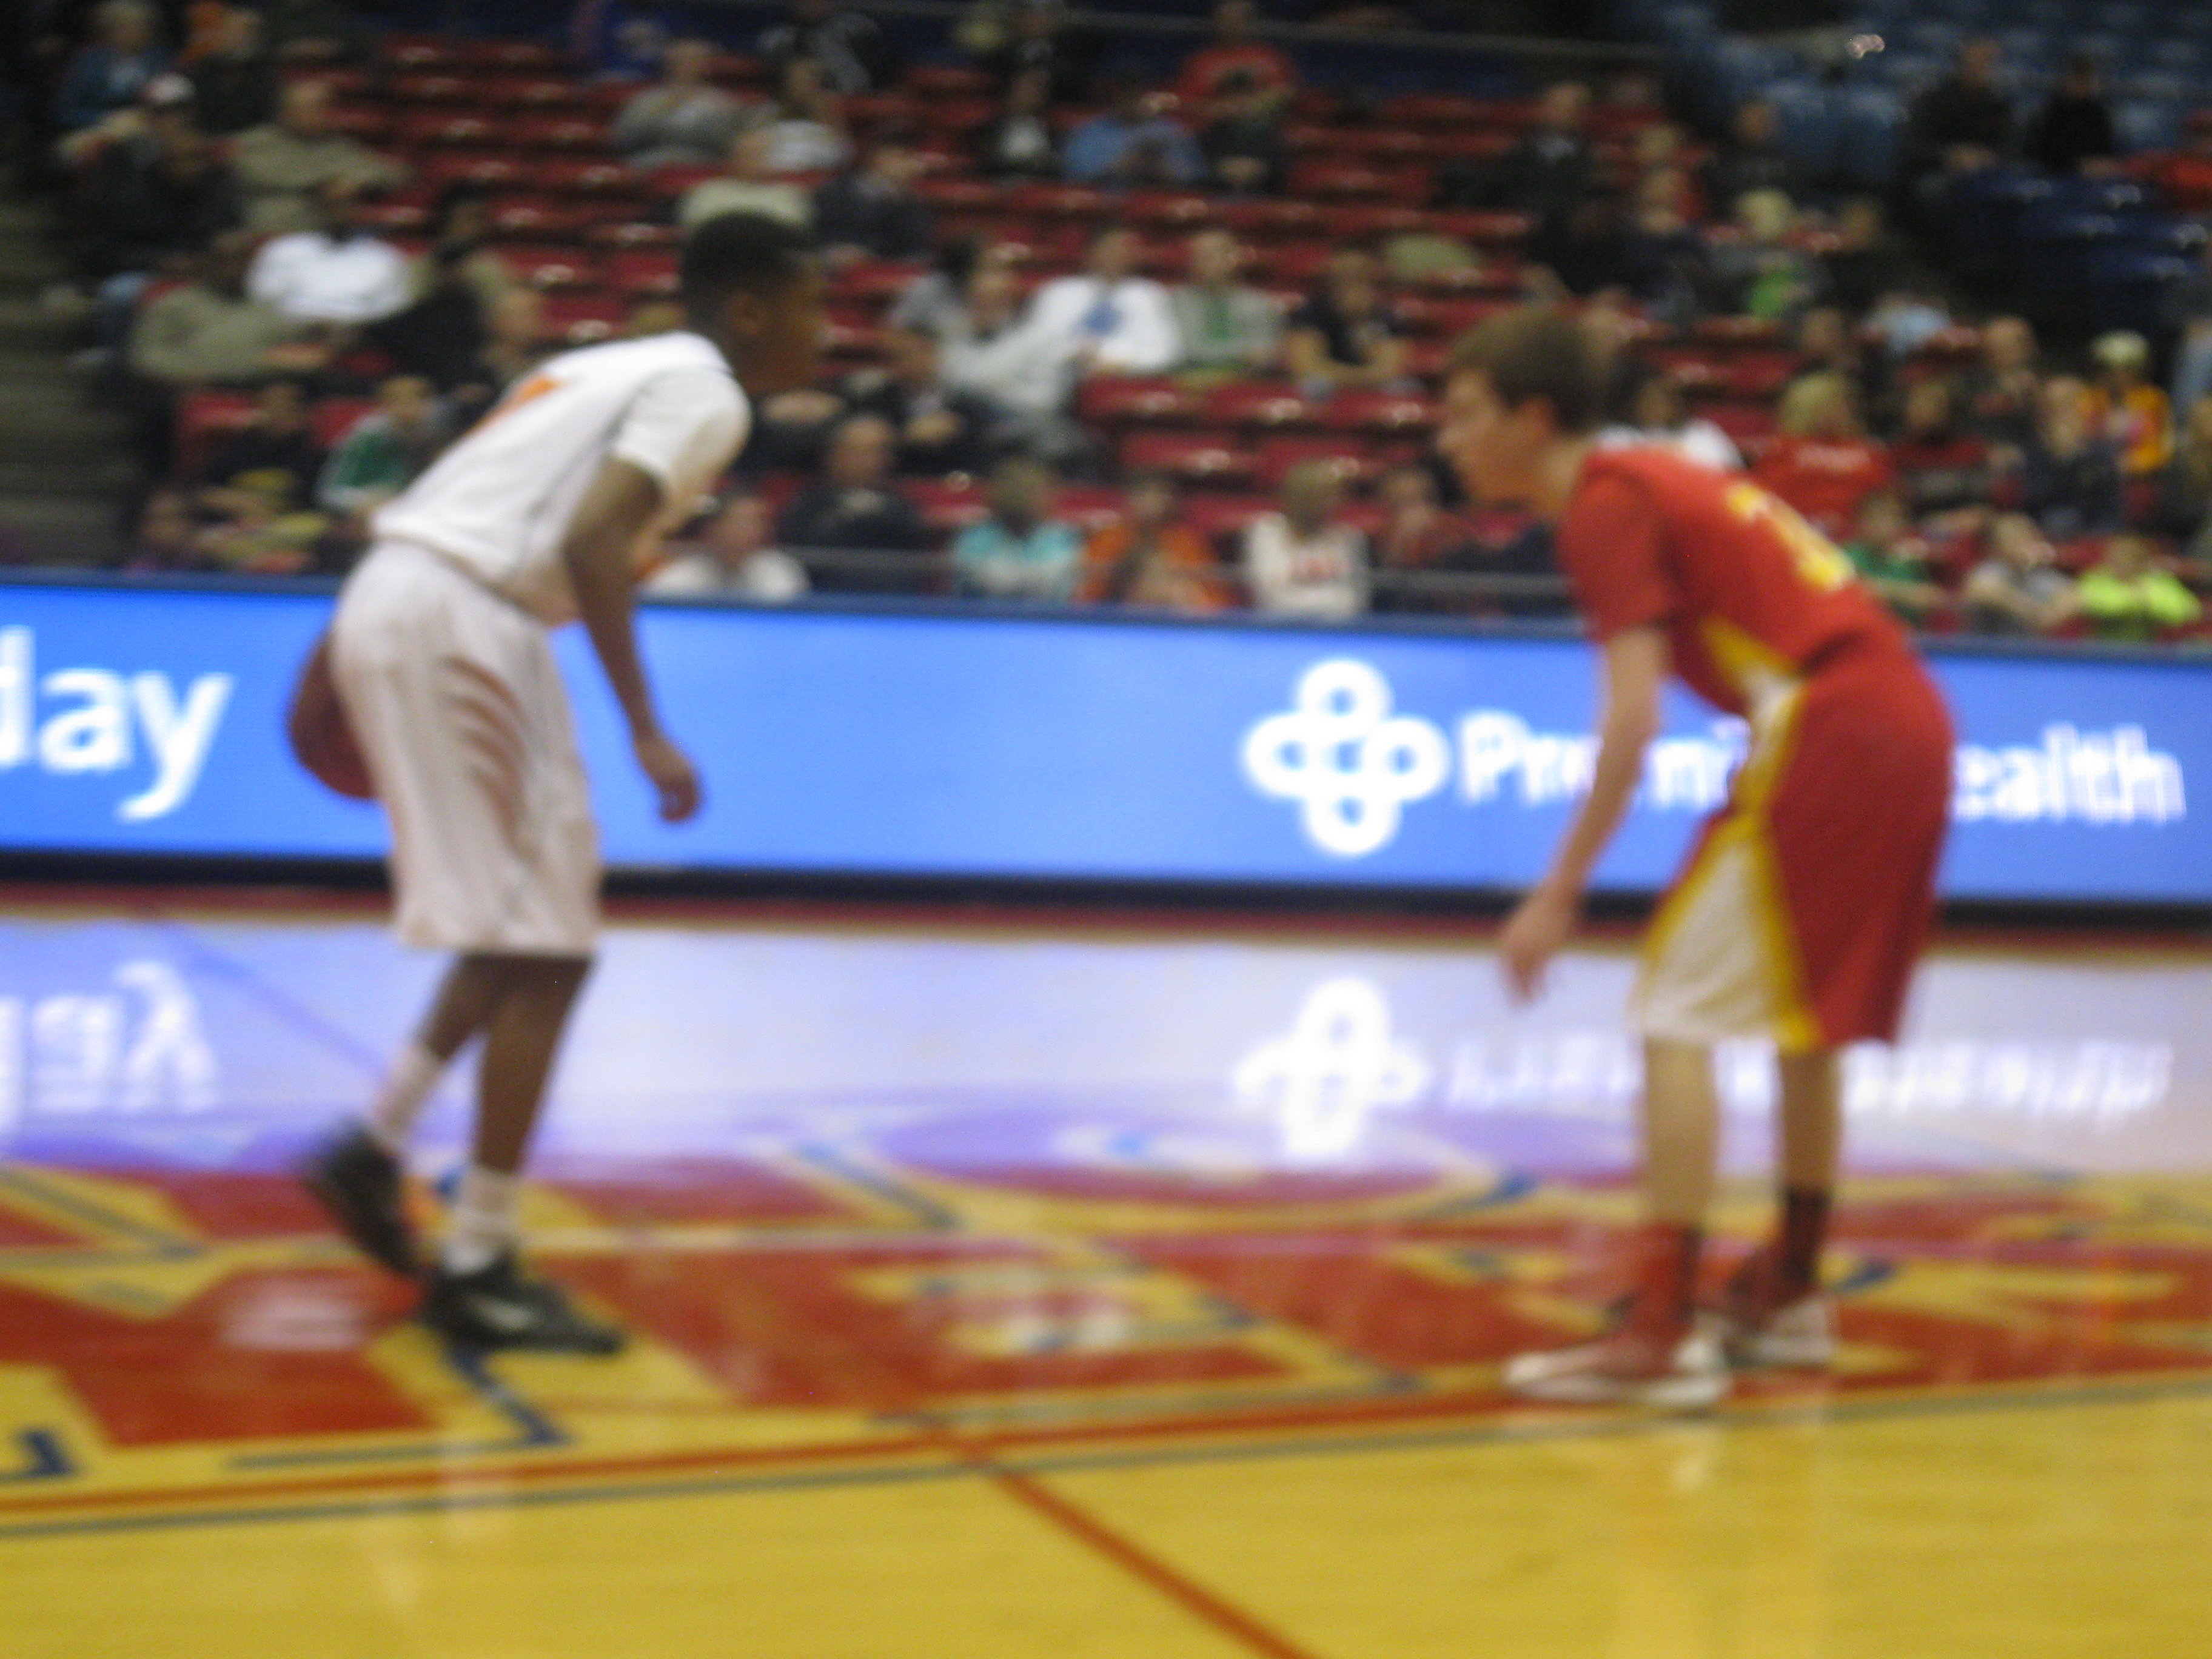 Fenwick lost its Division III sectional game with Dayton Stivers Friday night at UD Arena.